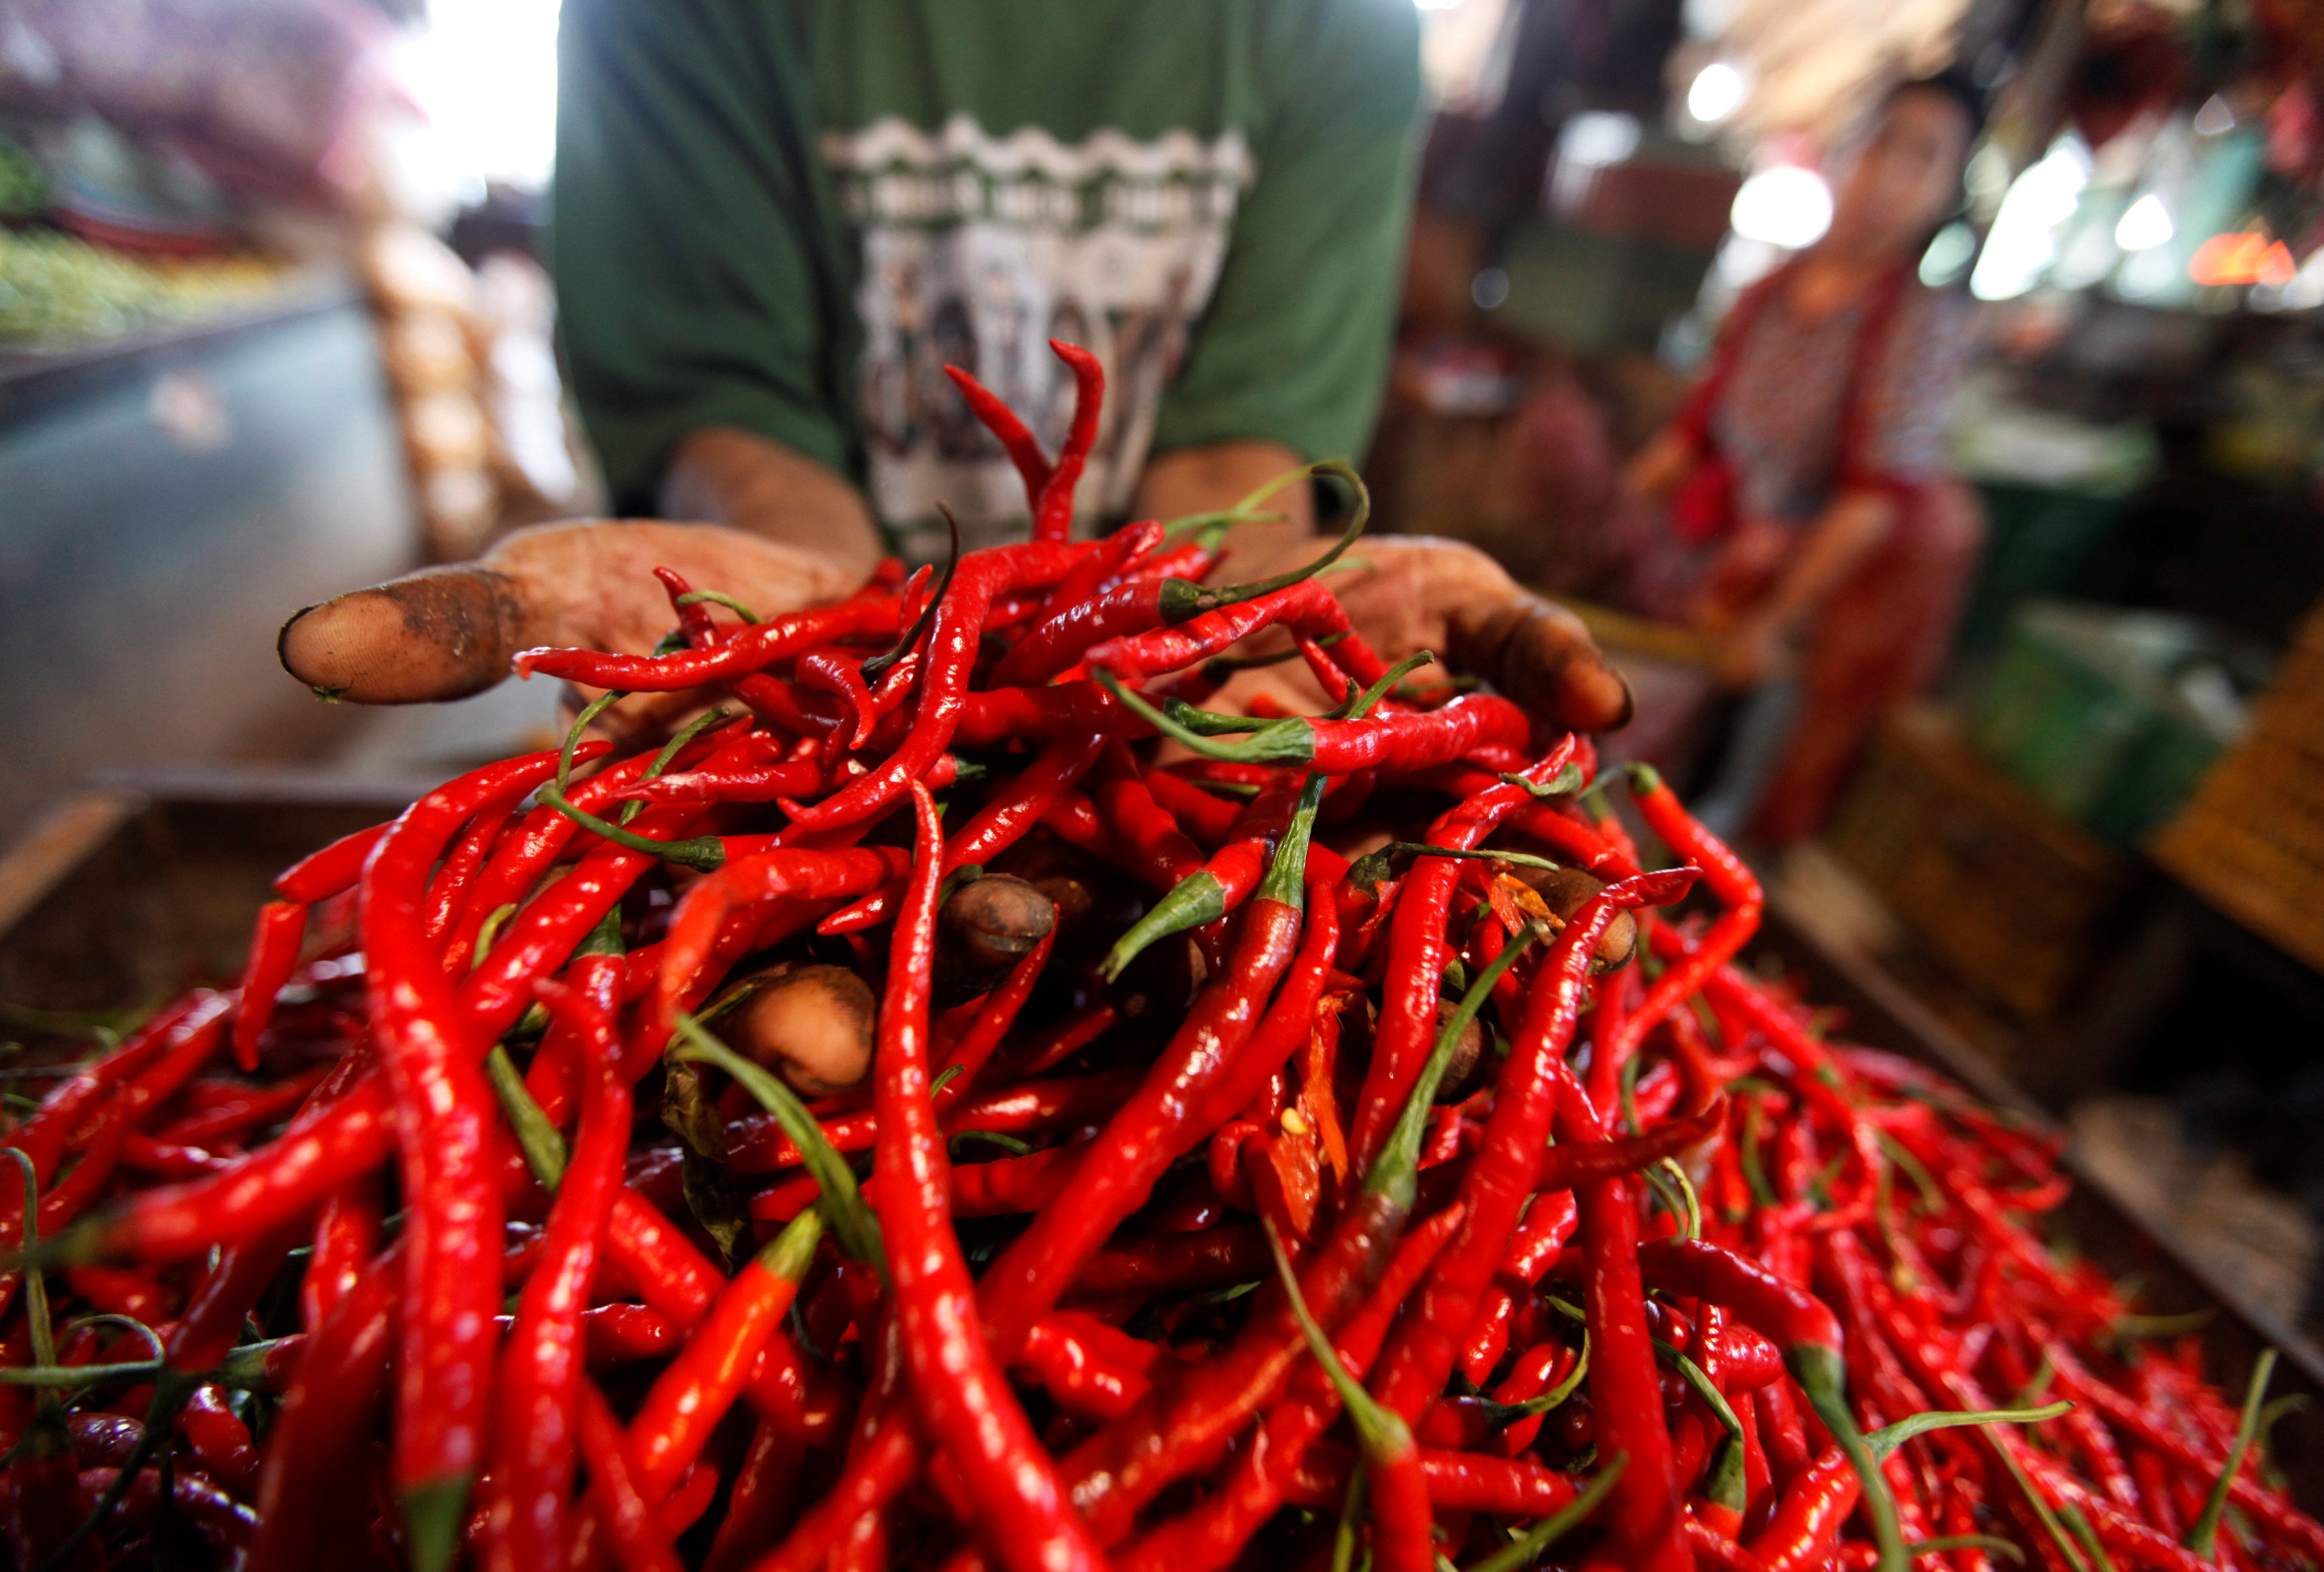 A trader displays chilis for sale at traditional market in Jakarta, Indonesia December 16, 2016. REUTERS/Fatima El-Kareem FOR EDITORIAL USE ONLY. NO RESALES. NO ARCHIVES.n